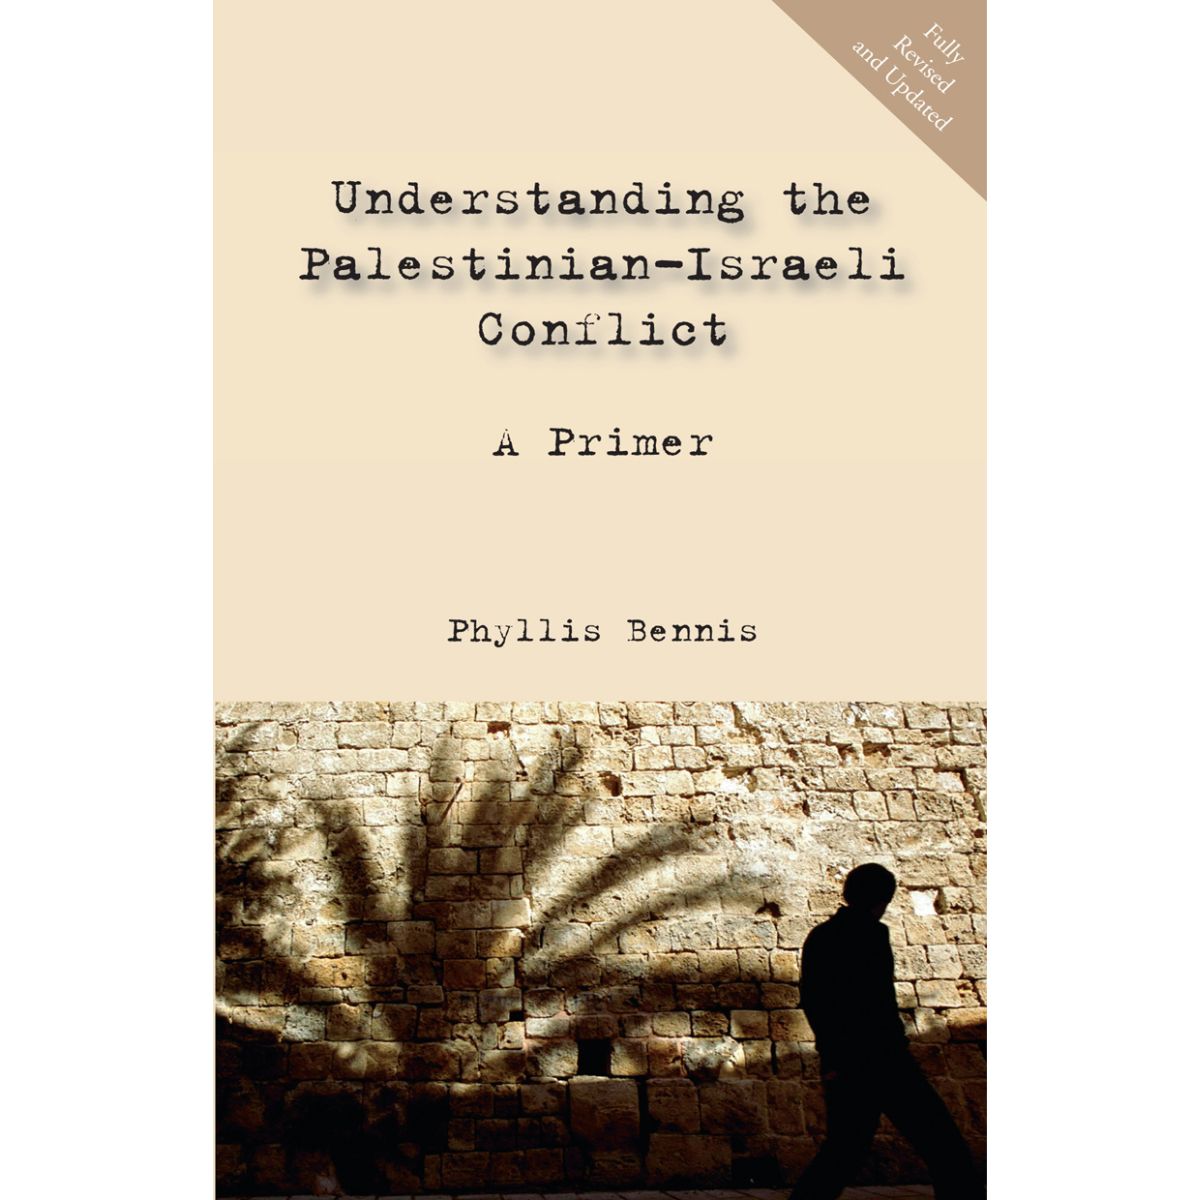 Understanding the Palestinian-Israeli Conflict: A Primer